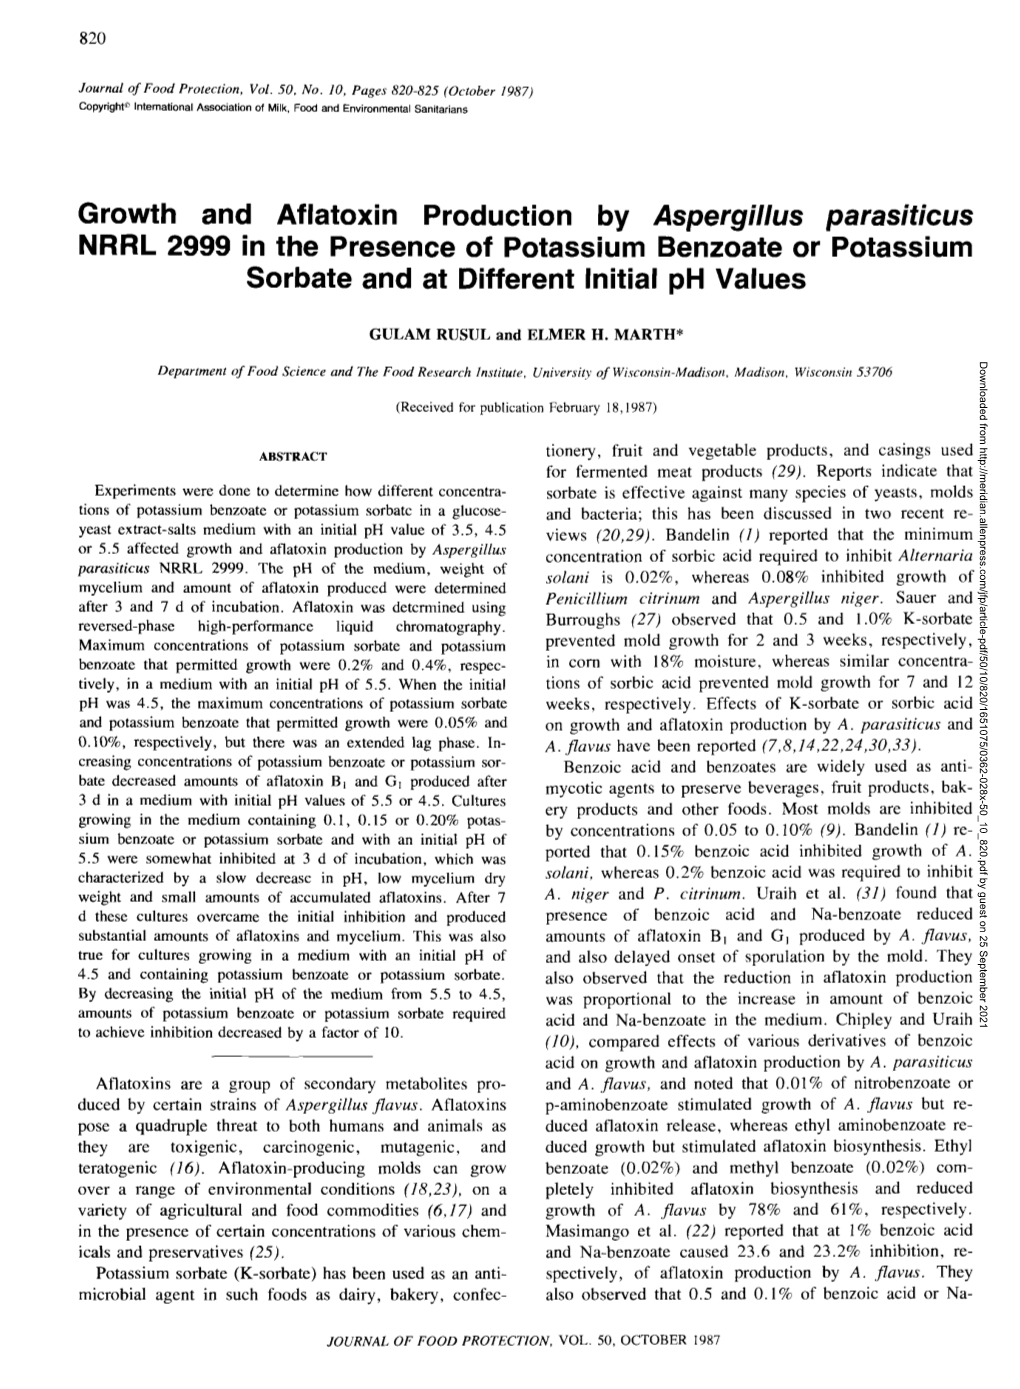 Growth and Aflatoxin Production by Aspergillus Parasiticus NRRL 2999 in the Presence of Potassium Benzoate Or Potassium Sorbate and at Different Initial Ph Values